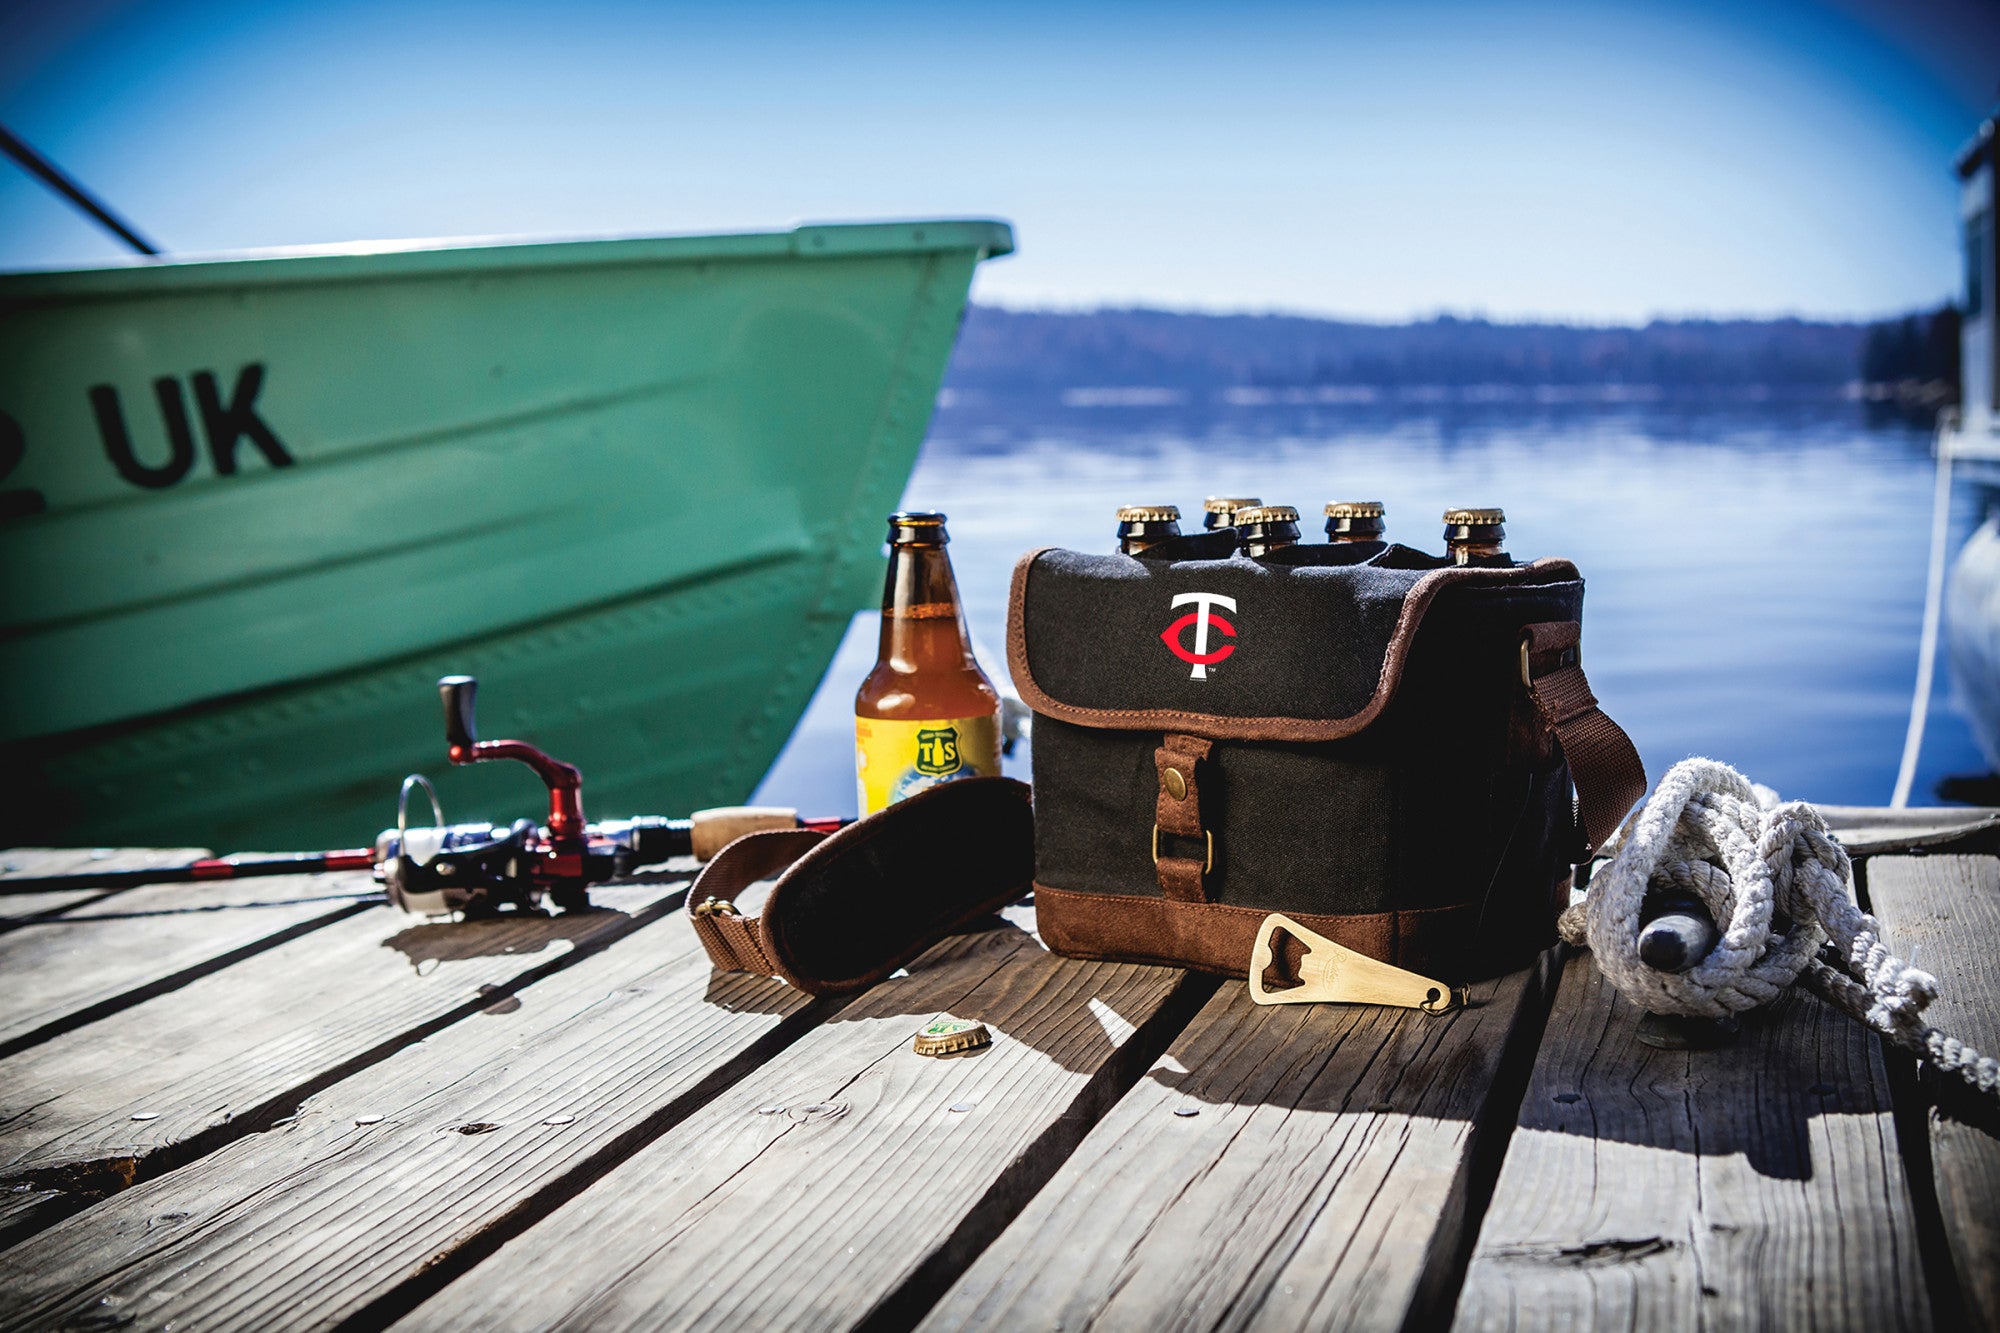 Minnesota Twins - Beer Caddy Cooler Tote with Opener